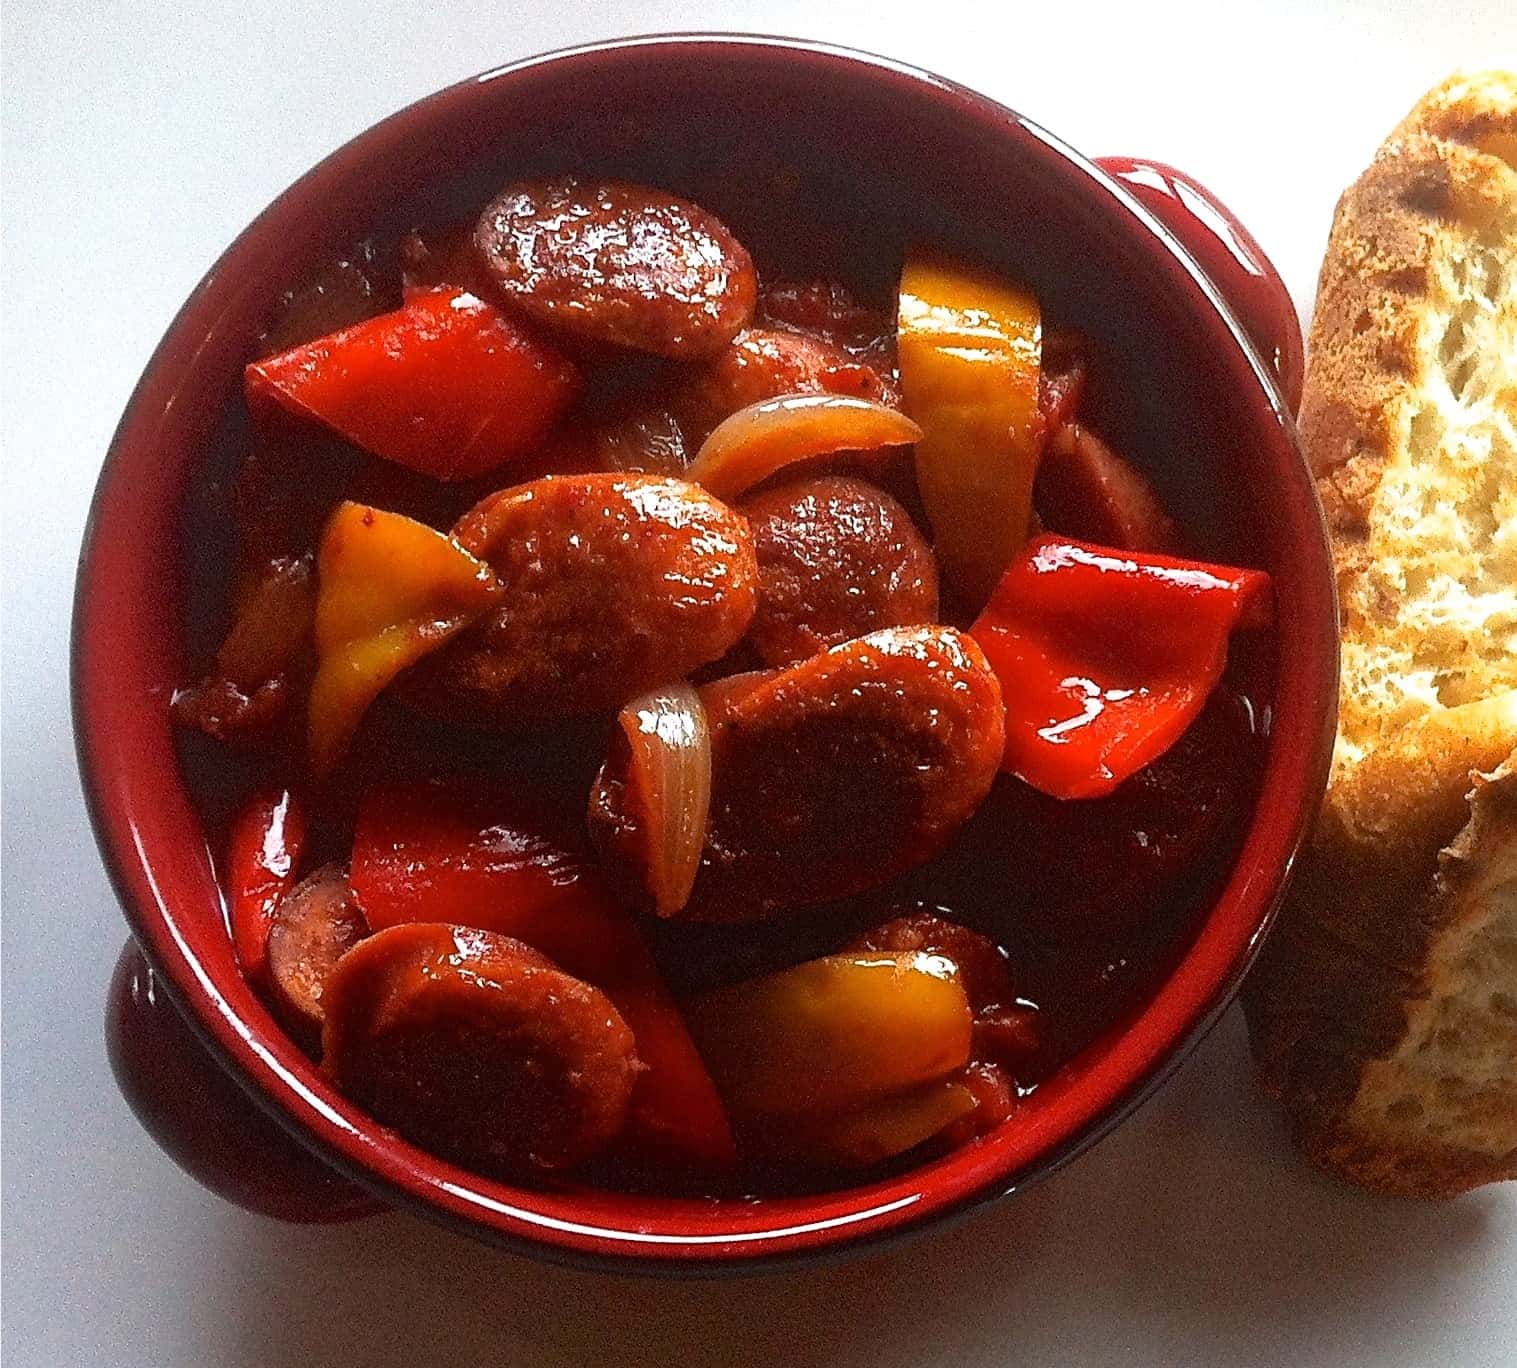 Traditional Spetsofai (Spetzofai) Recipe - Spicy Greek Sausages with Peppers and Tomato sauce